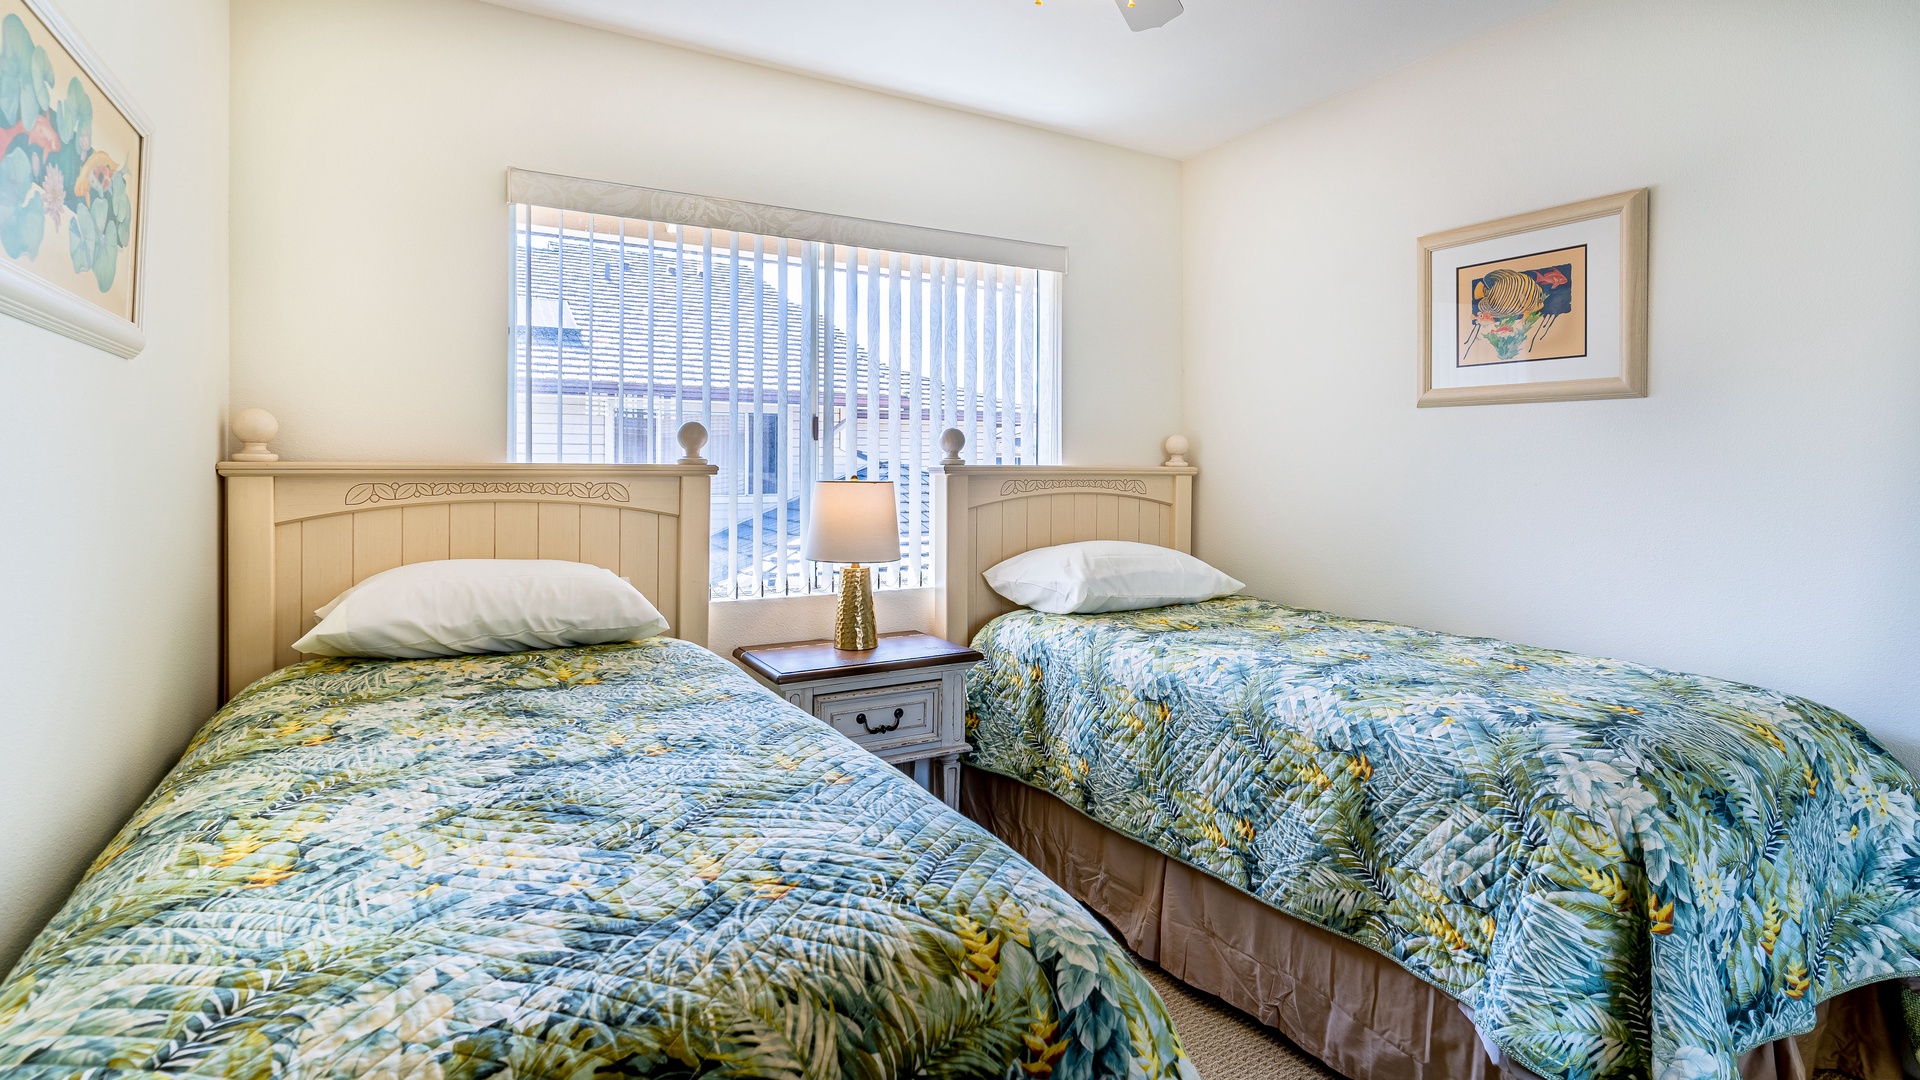 Kapolei Vacation Rentals, Fairways at Ko Olina 20G - The third guest bedroom is well appointed with two twin beds for a restful slumber.